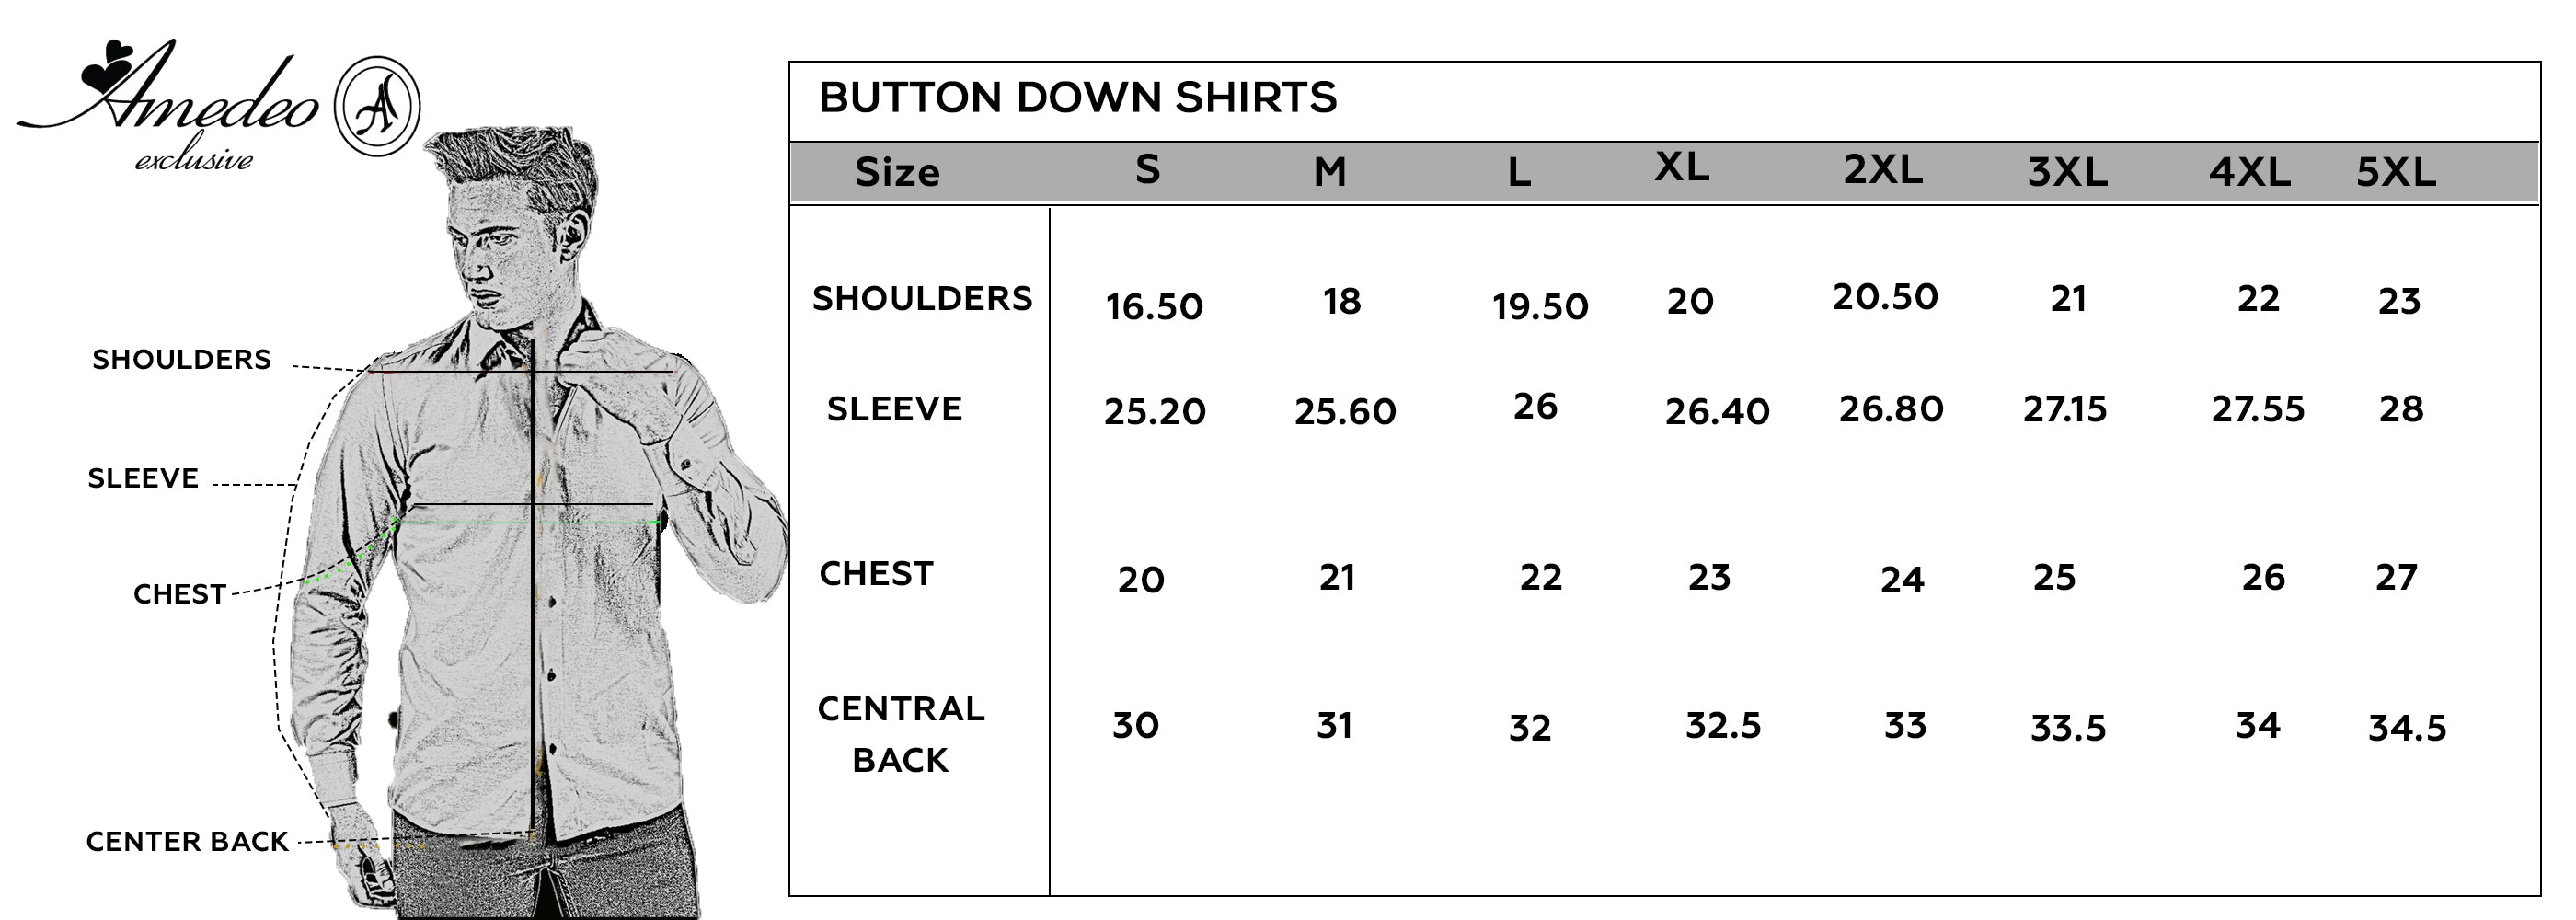 Light Yellow Floral Mens Slim Fit Designer Dress Shirt - tailored Cotton Shirts for Work and